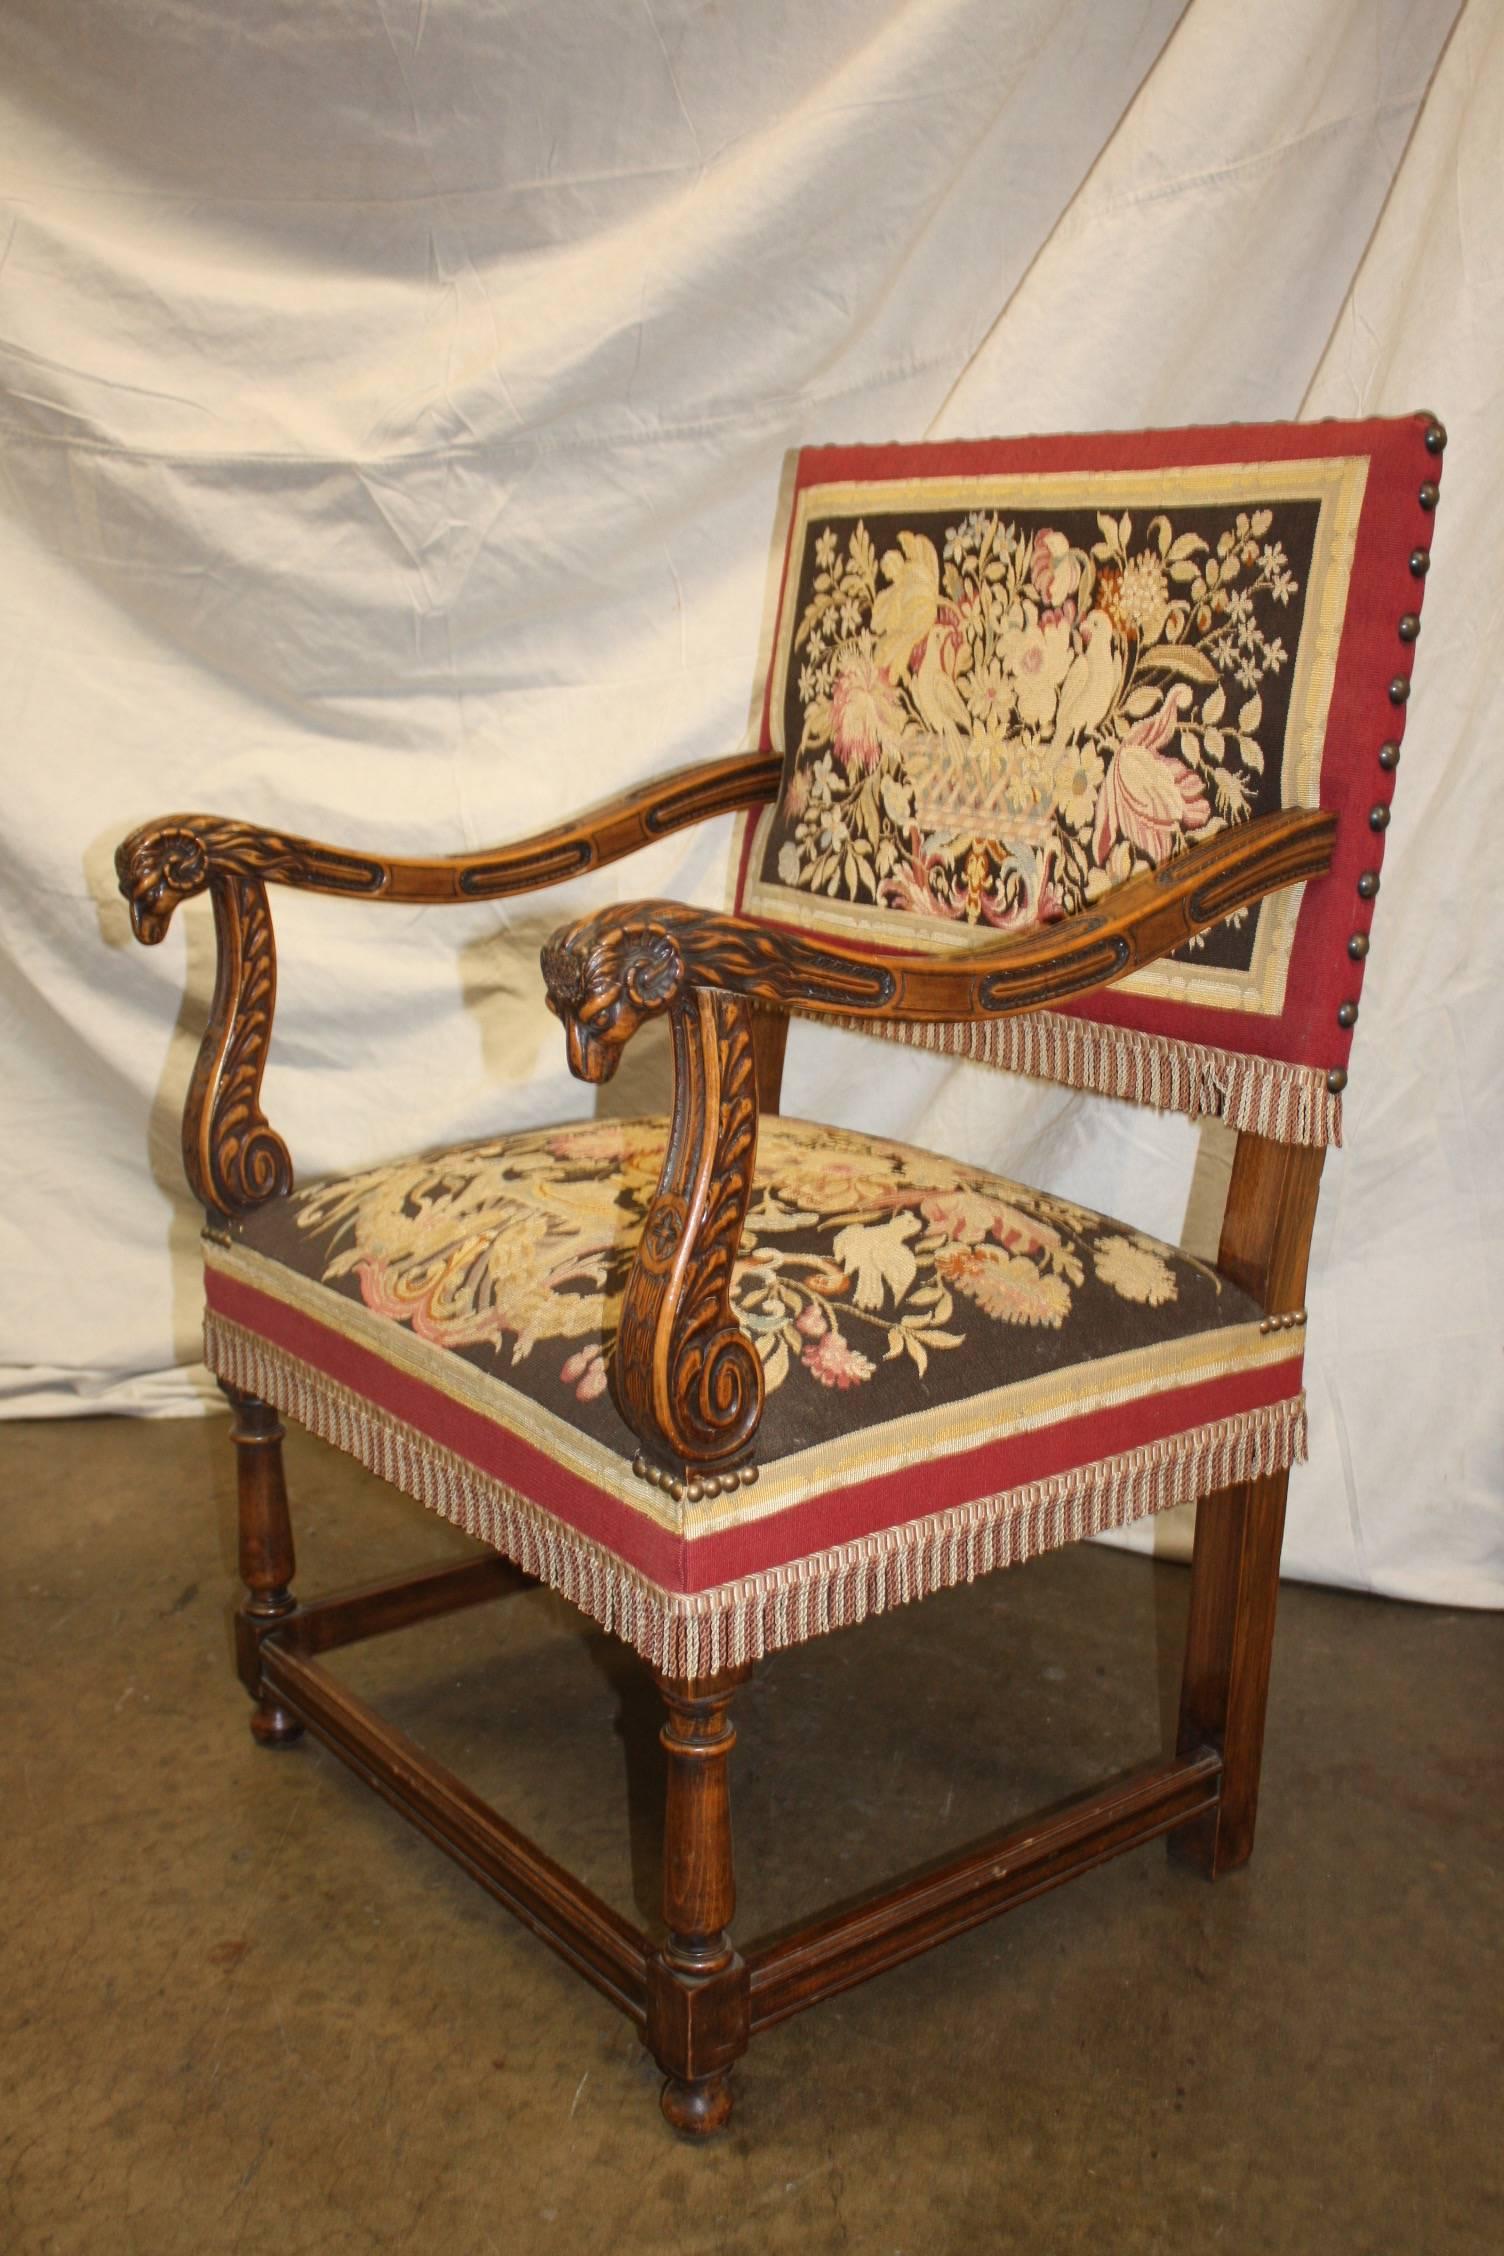 Magnificent 19th Century French Armchair In Excellent Condition For Sale In Stockbridge, GA